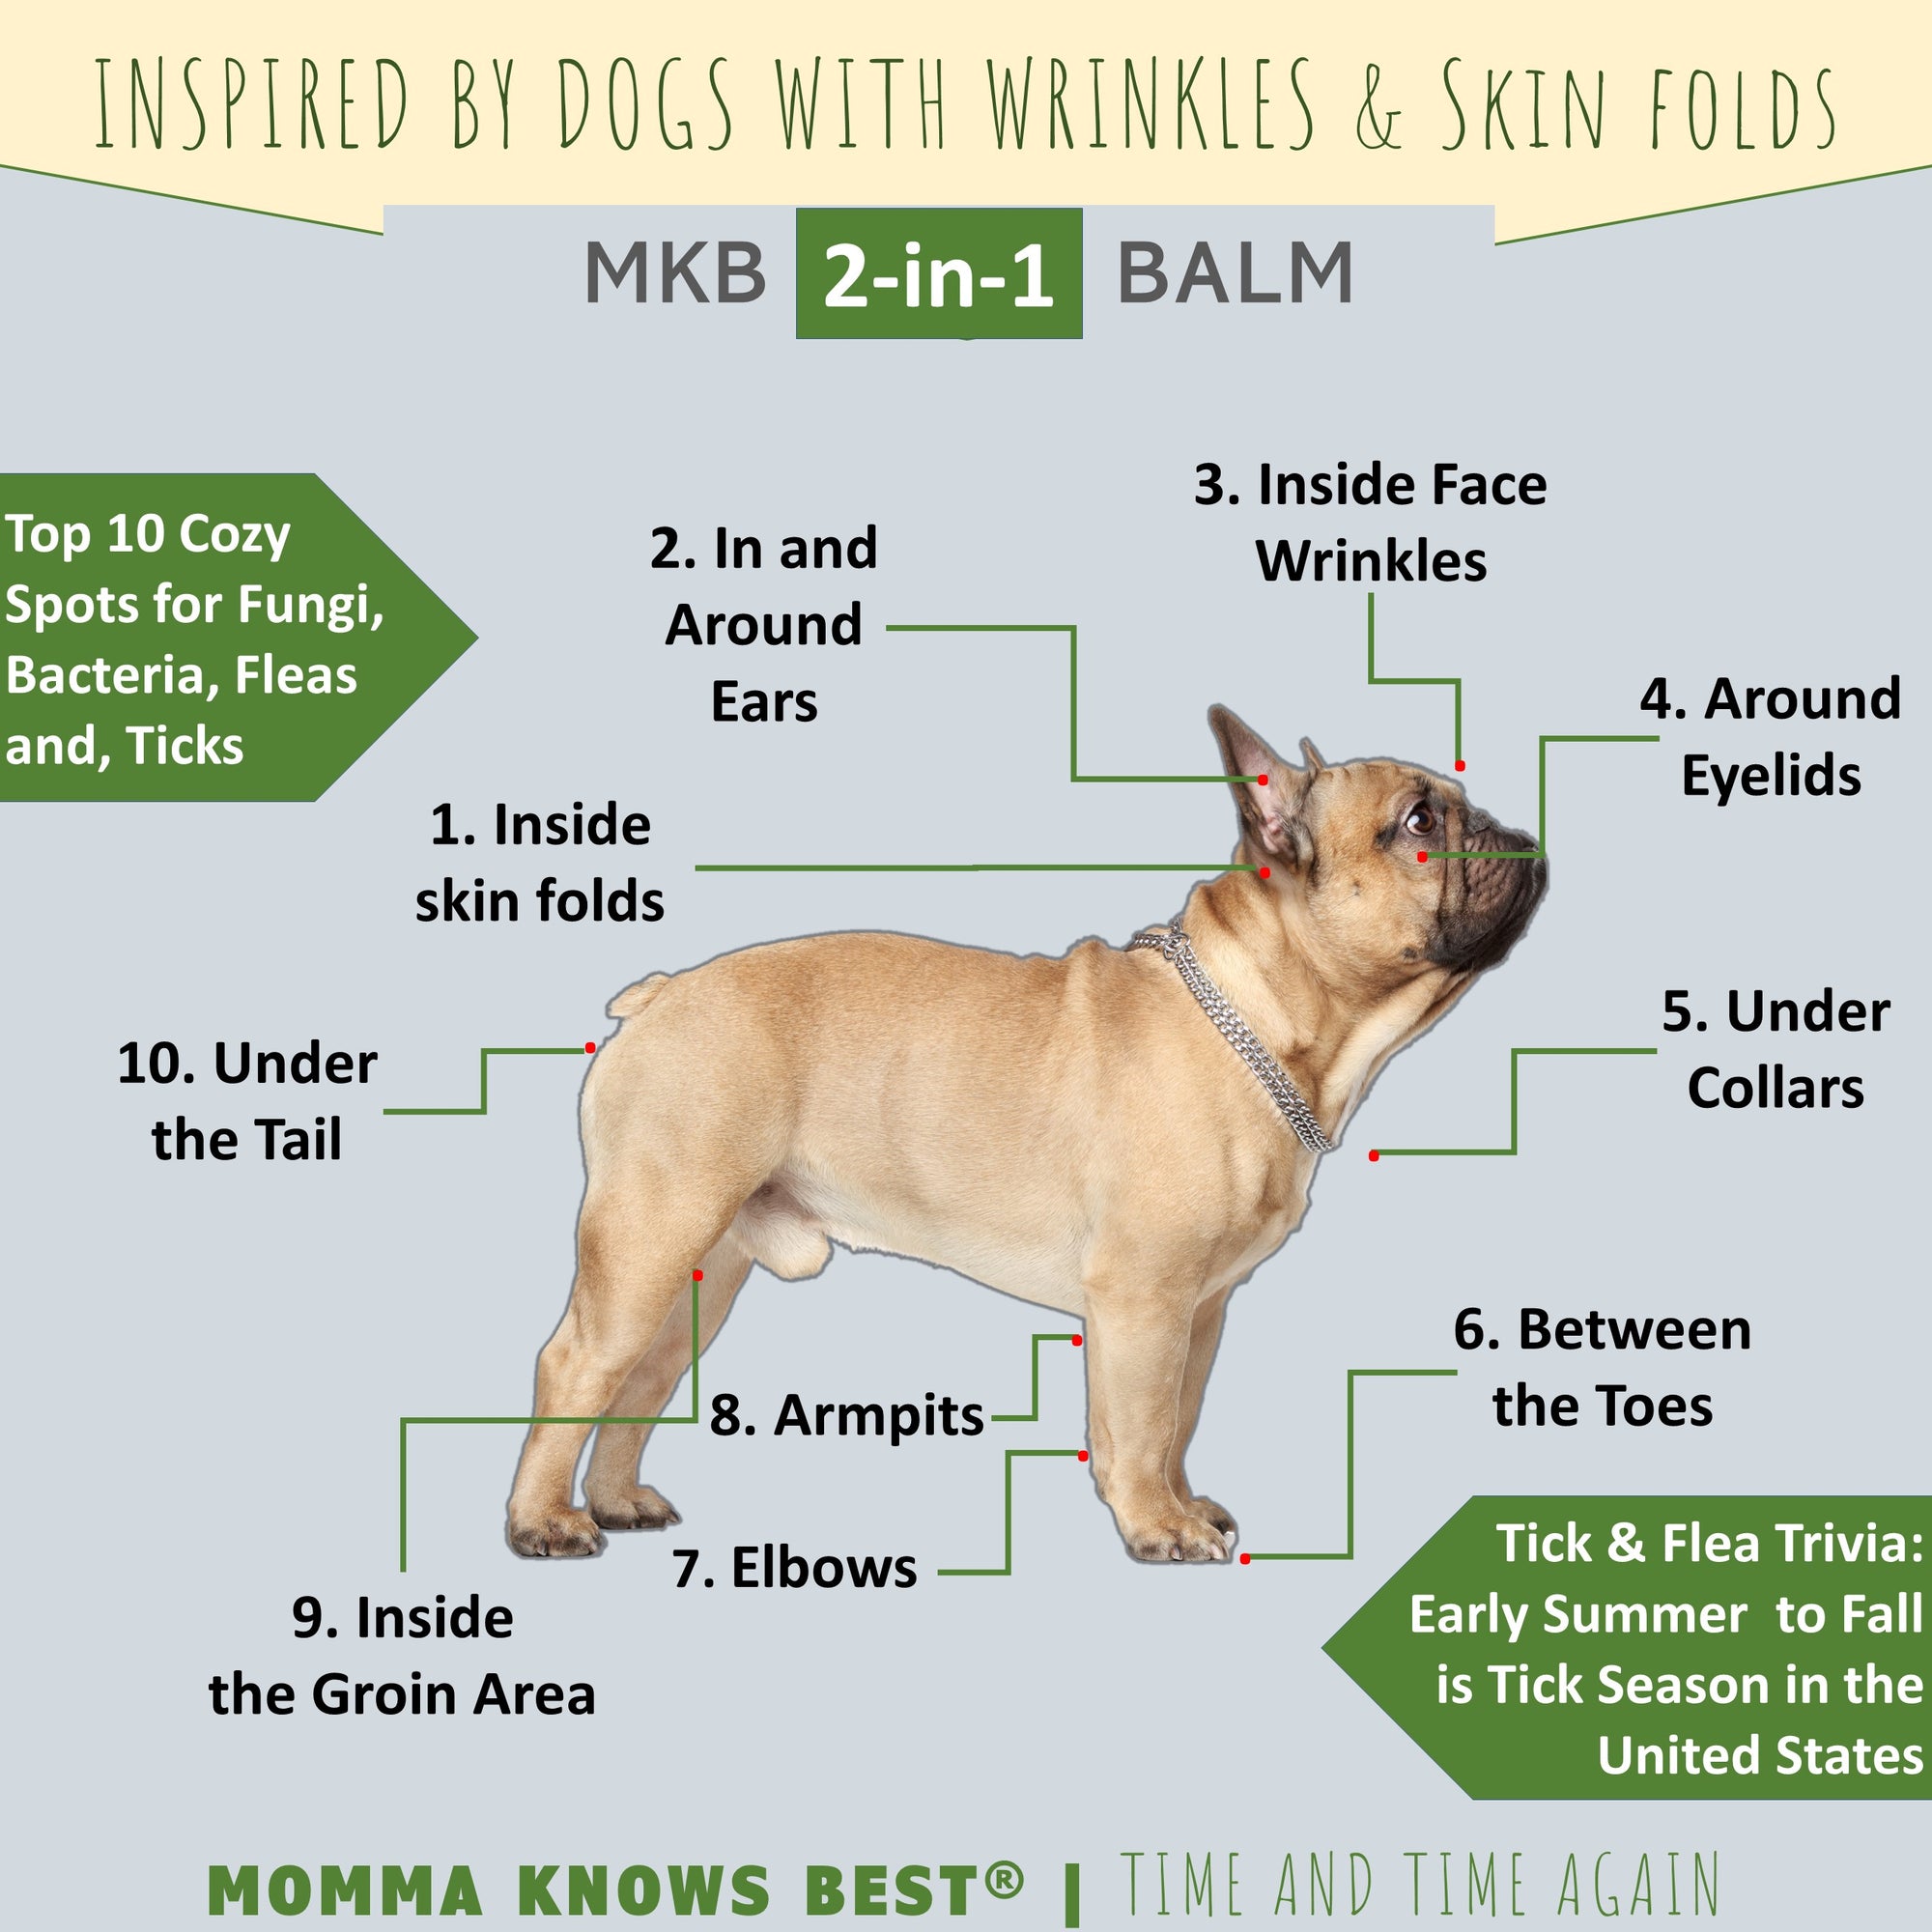 10 Cozy Parts for Bacteria, Yeast, Fleas and Ticks on Dogs By Momma Knows Best